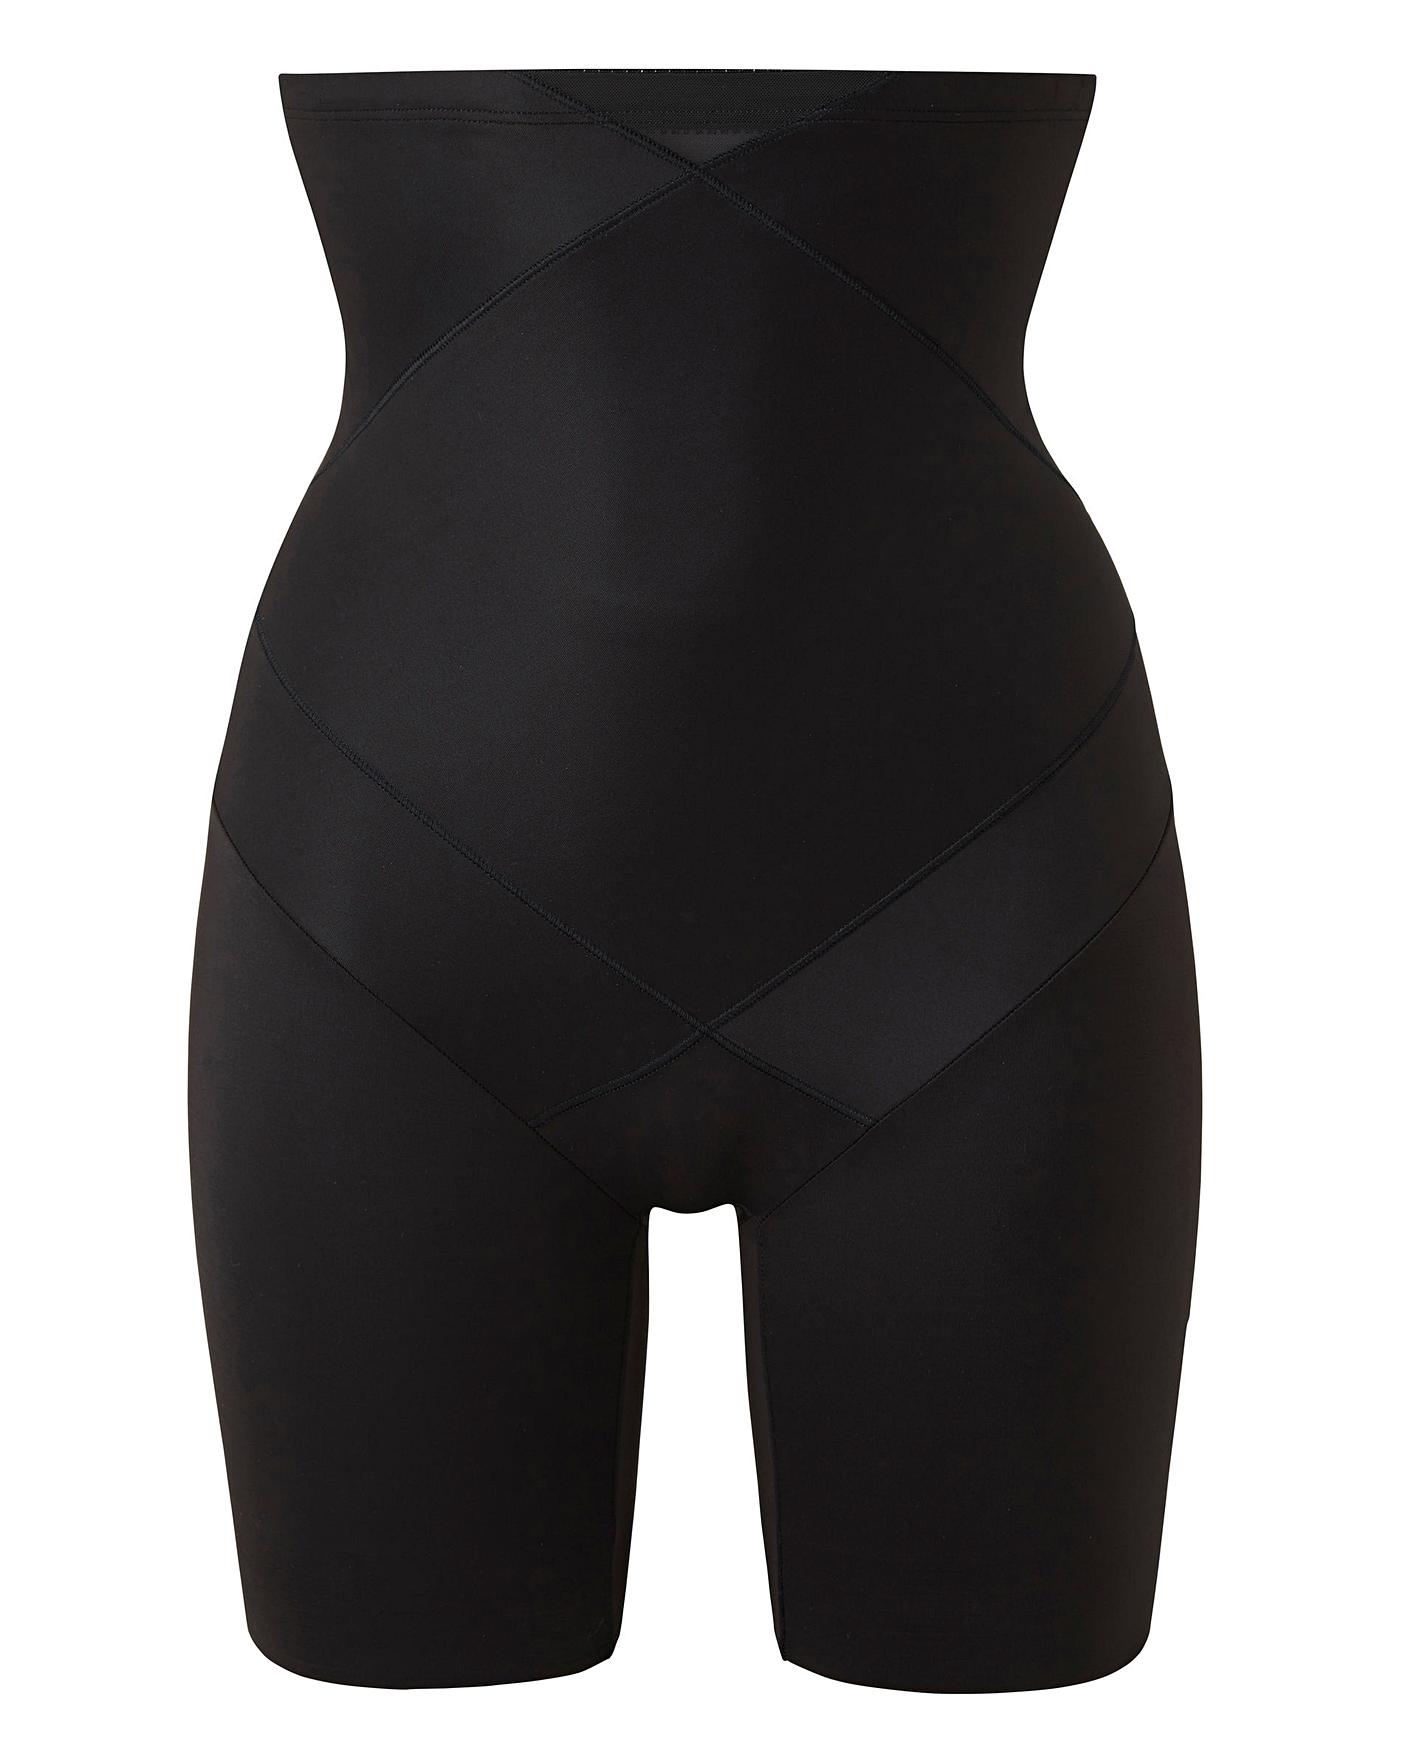 Miraclesuit TummyTuck Thigh Slimmer Blk